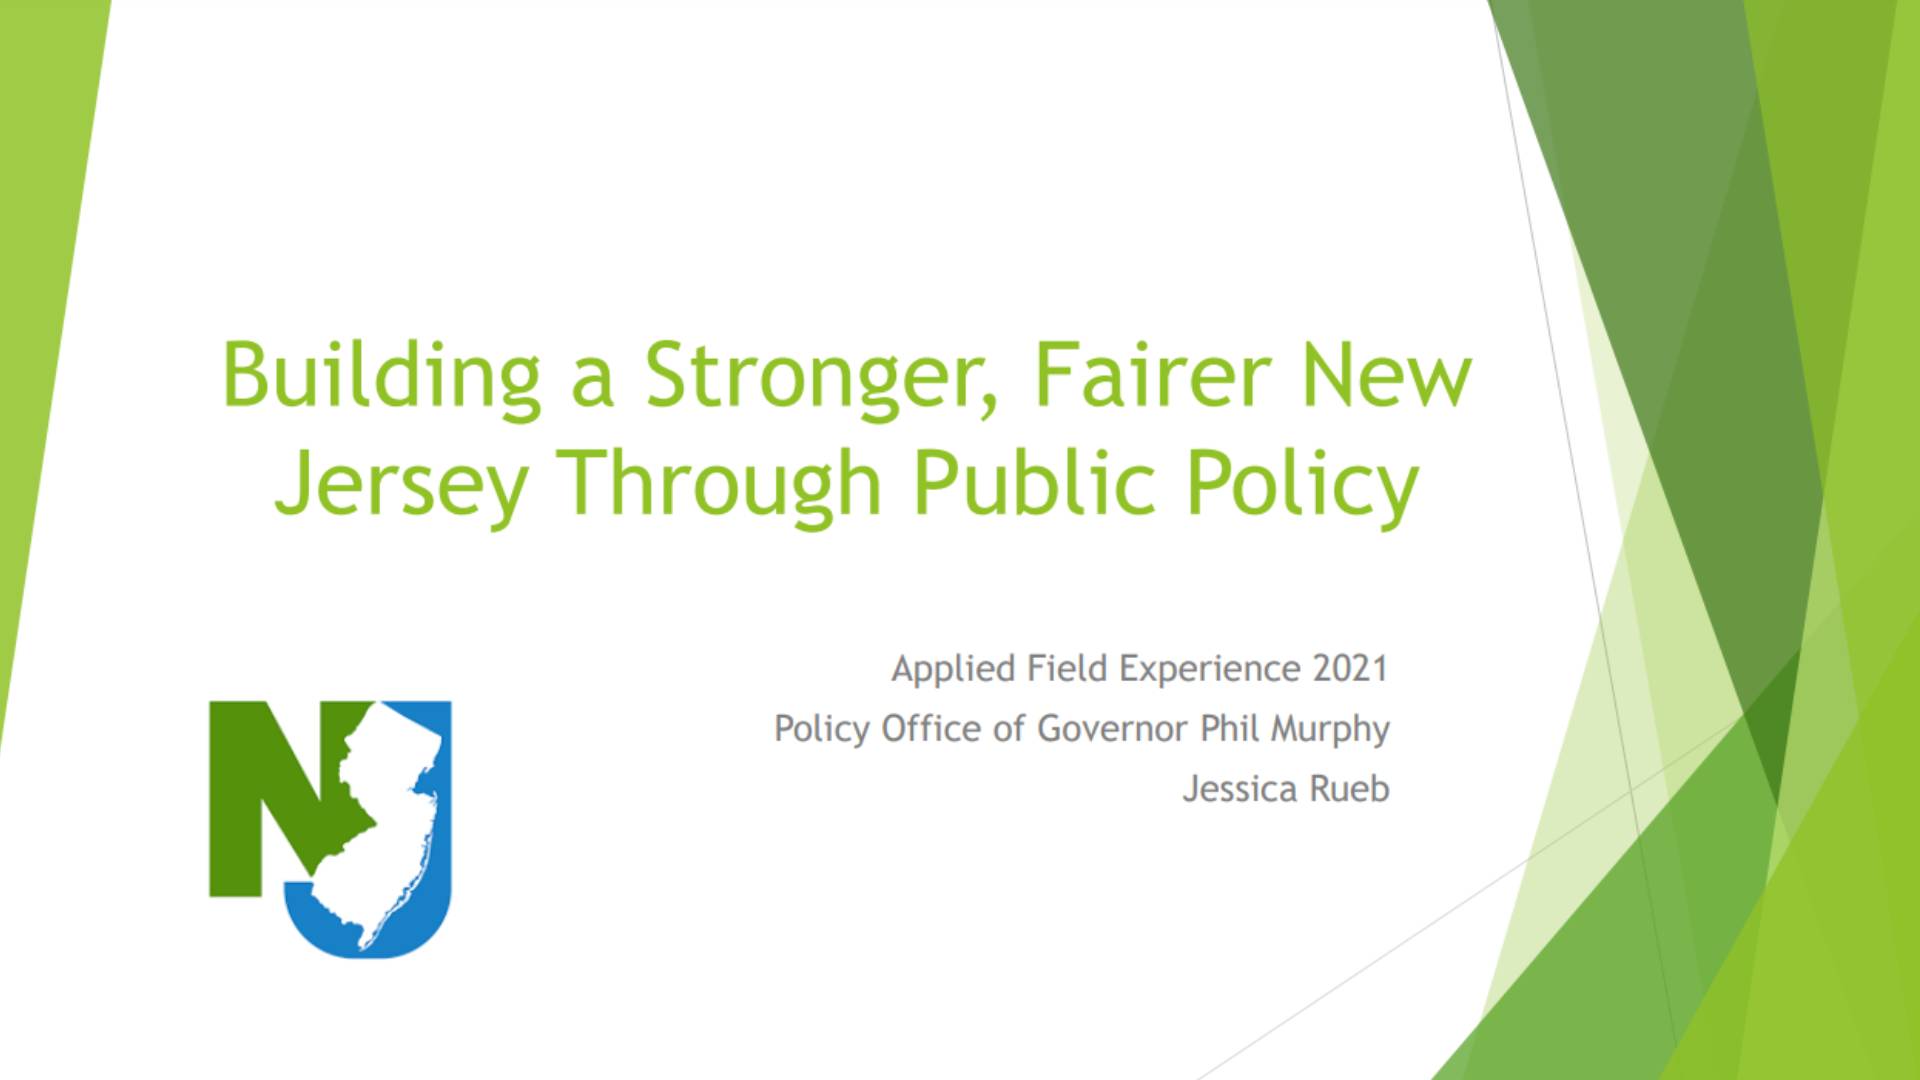 Building a Stronger, Fairer New Jersey Through Public Policy